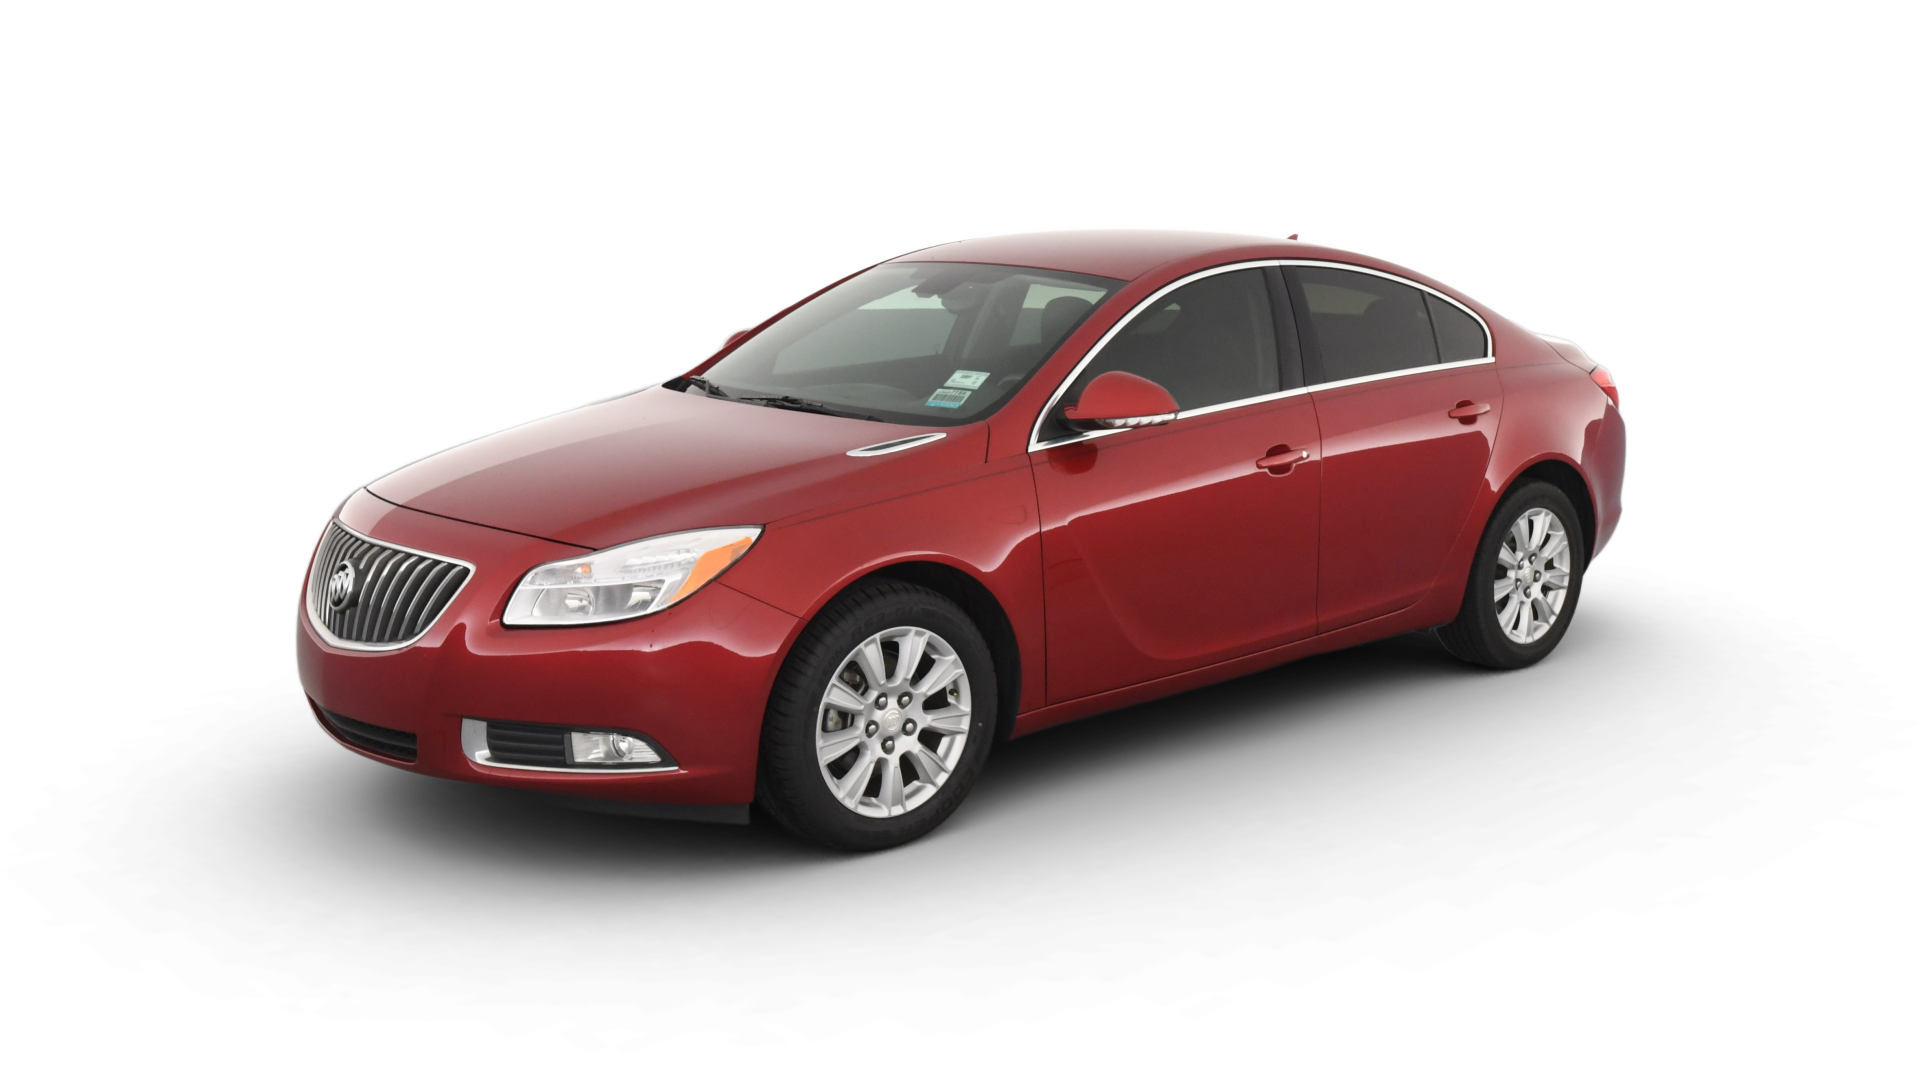 Used Buick Regal in gold or gray for Sale Online | Carvana